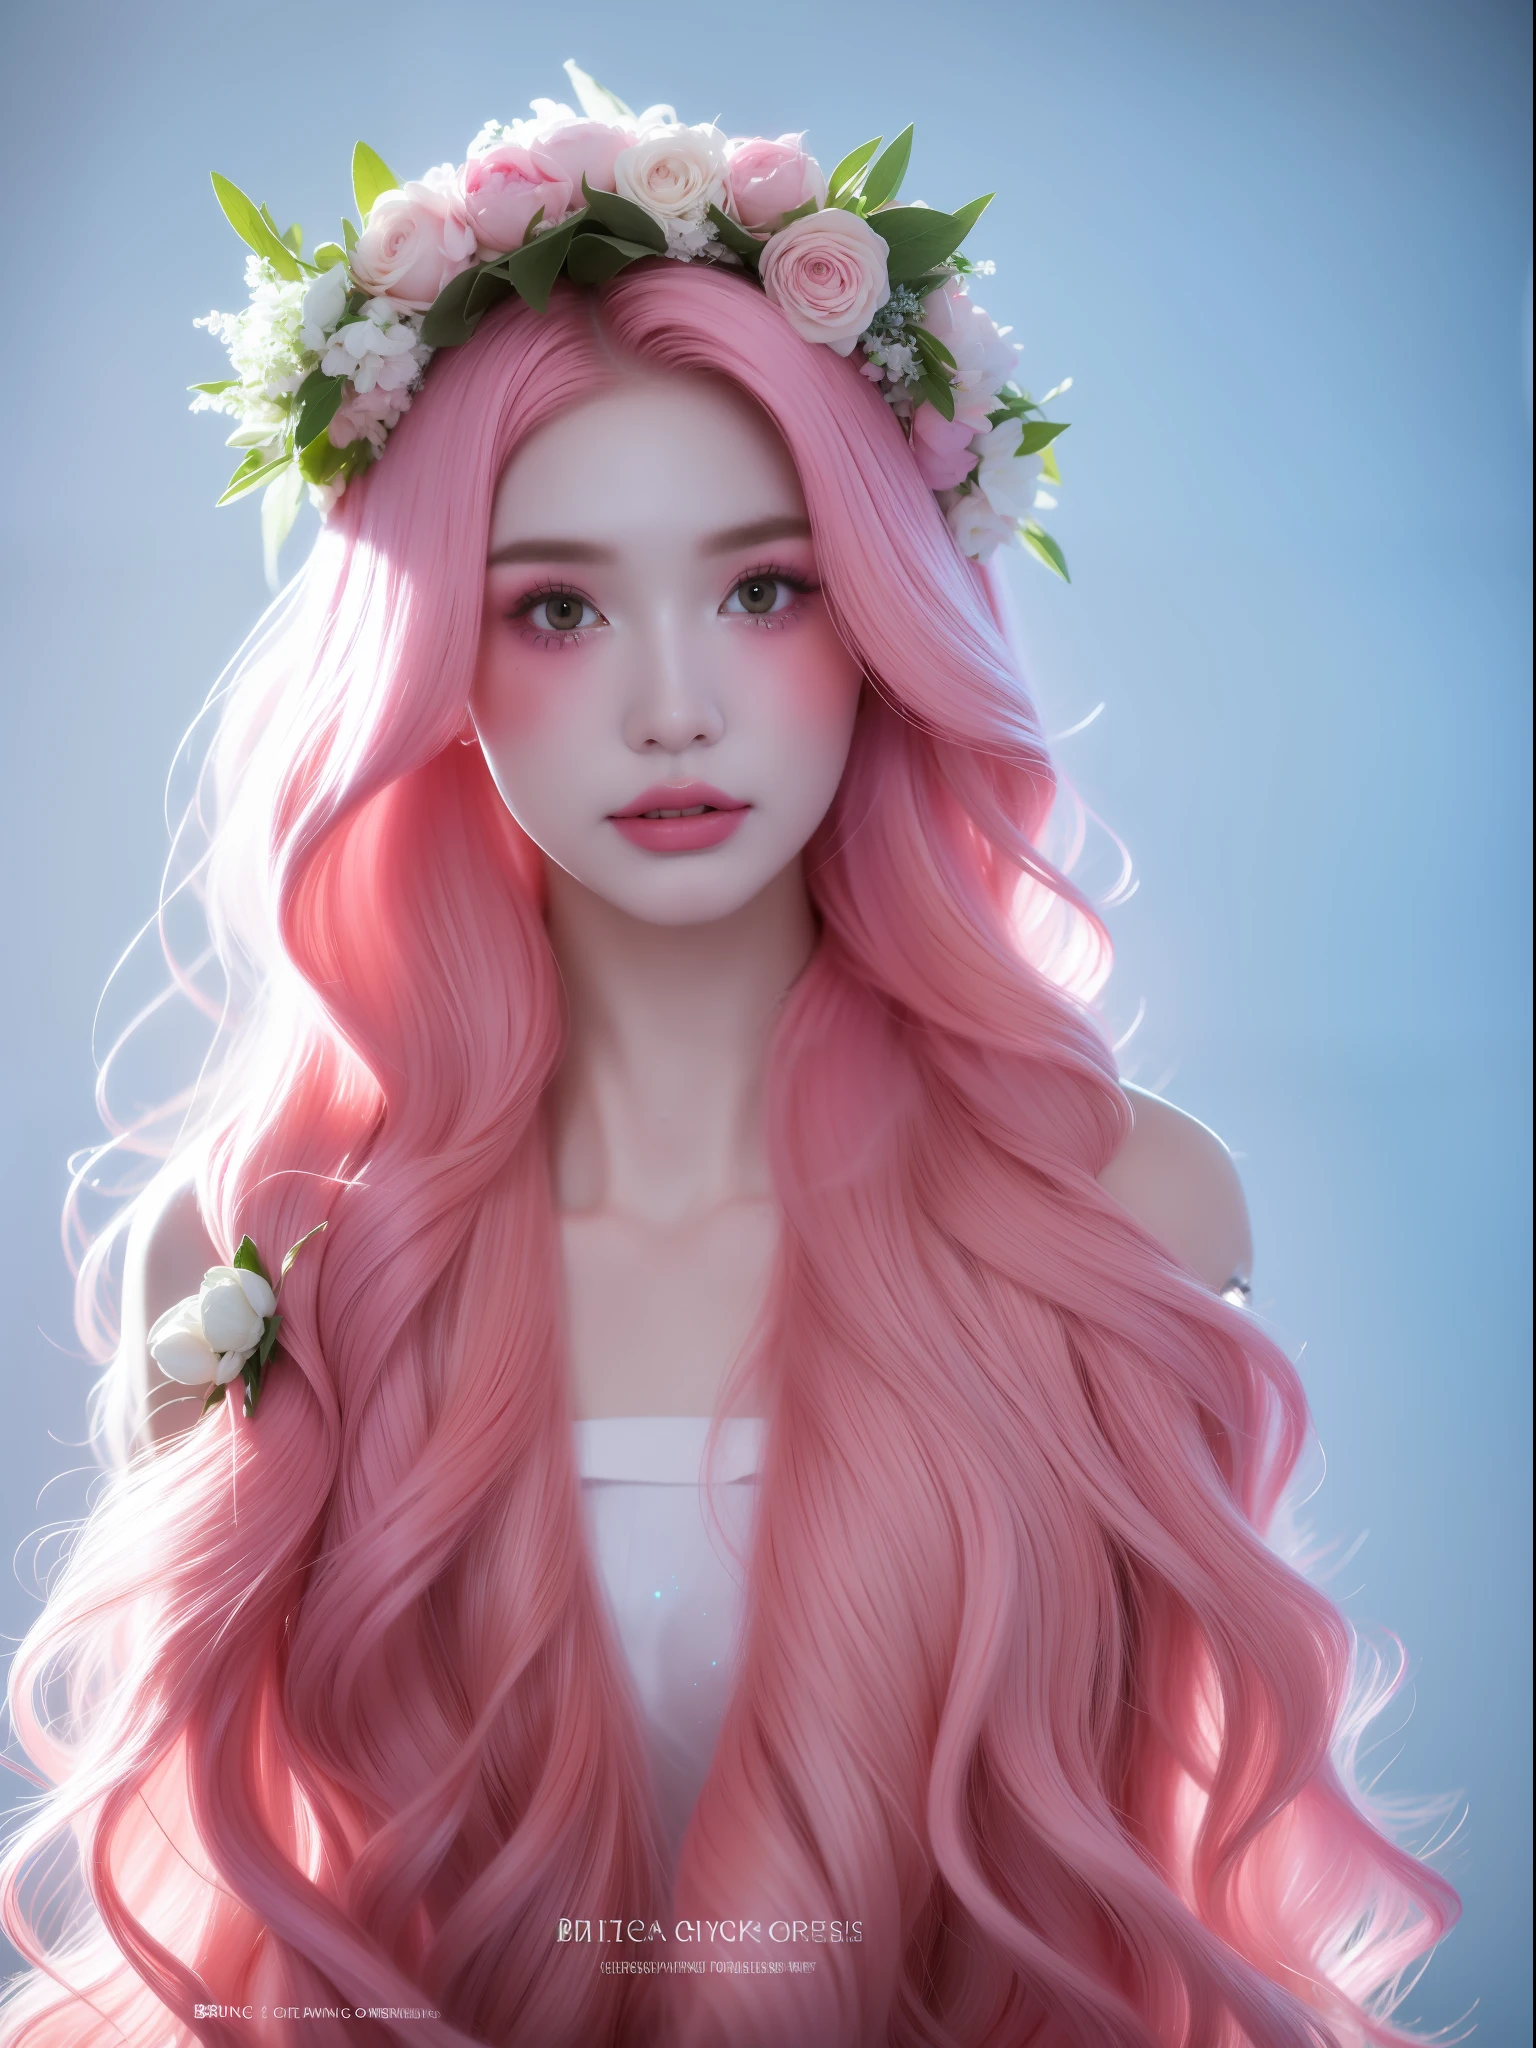 Pink hair，A woman with a flower crown on her head, Long flowing pink hair, Flowing pink hair, inspired by Yanjun Cheng, belle delphine, pink wispy hair, fairy core, Ethereal fantasy, ethereal fairytale, with pink hair, Guviz-style artwork, pink pastels, pastel light pink very long hair, Ethereal beauty